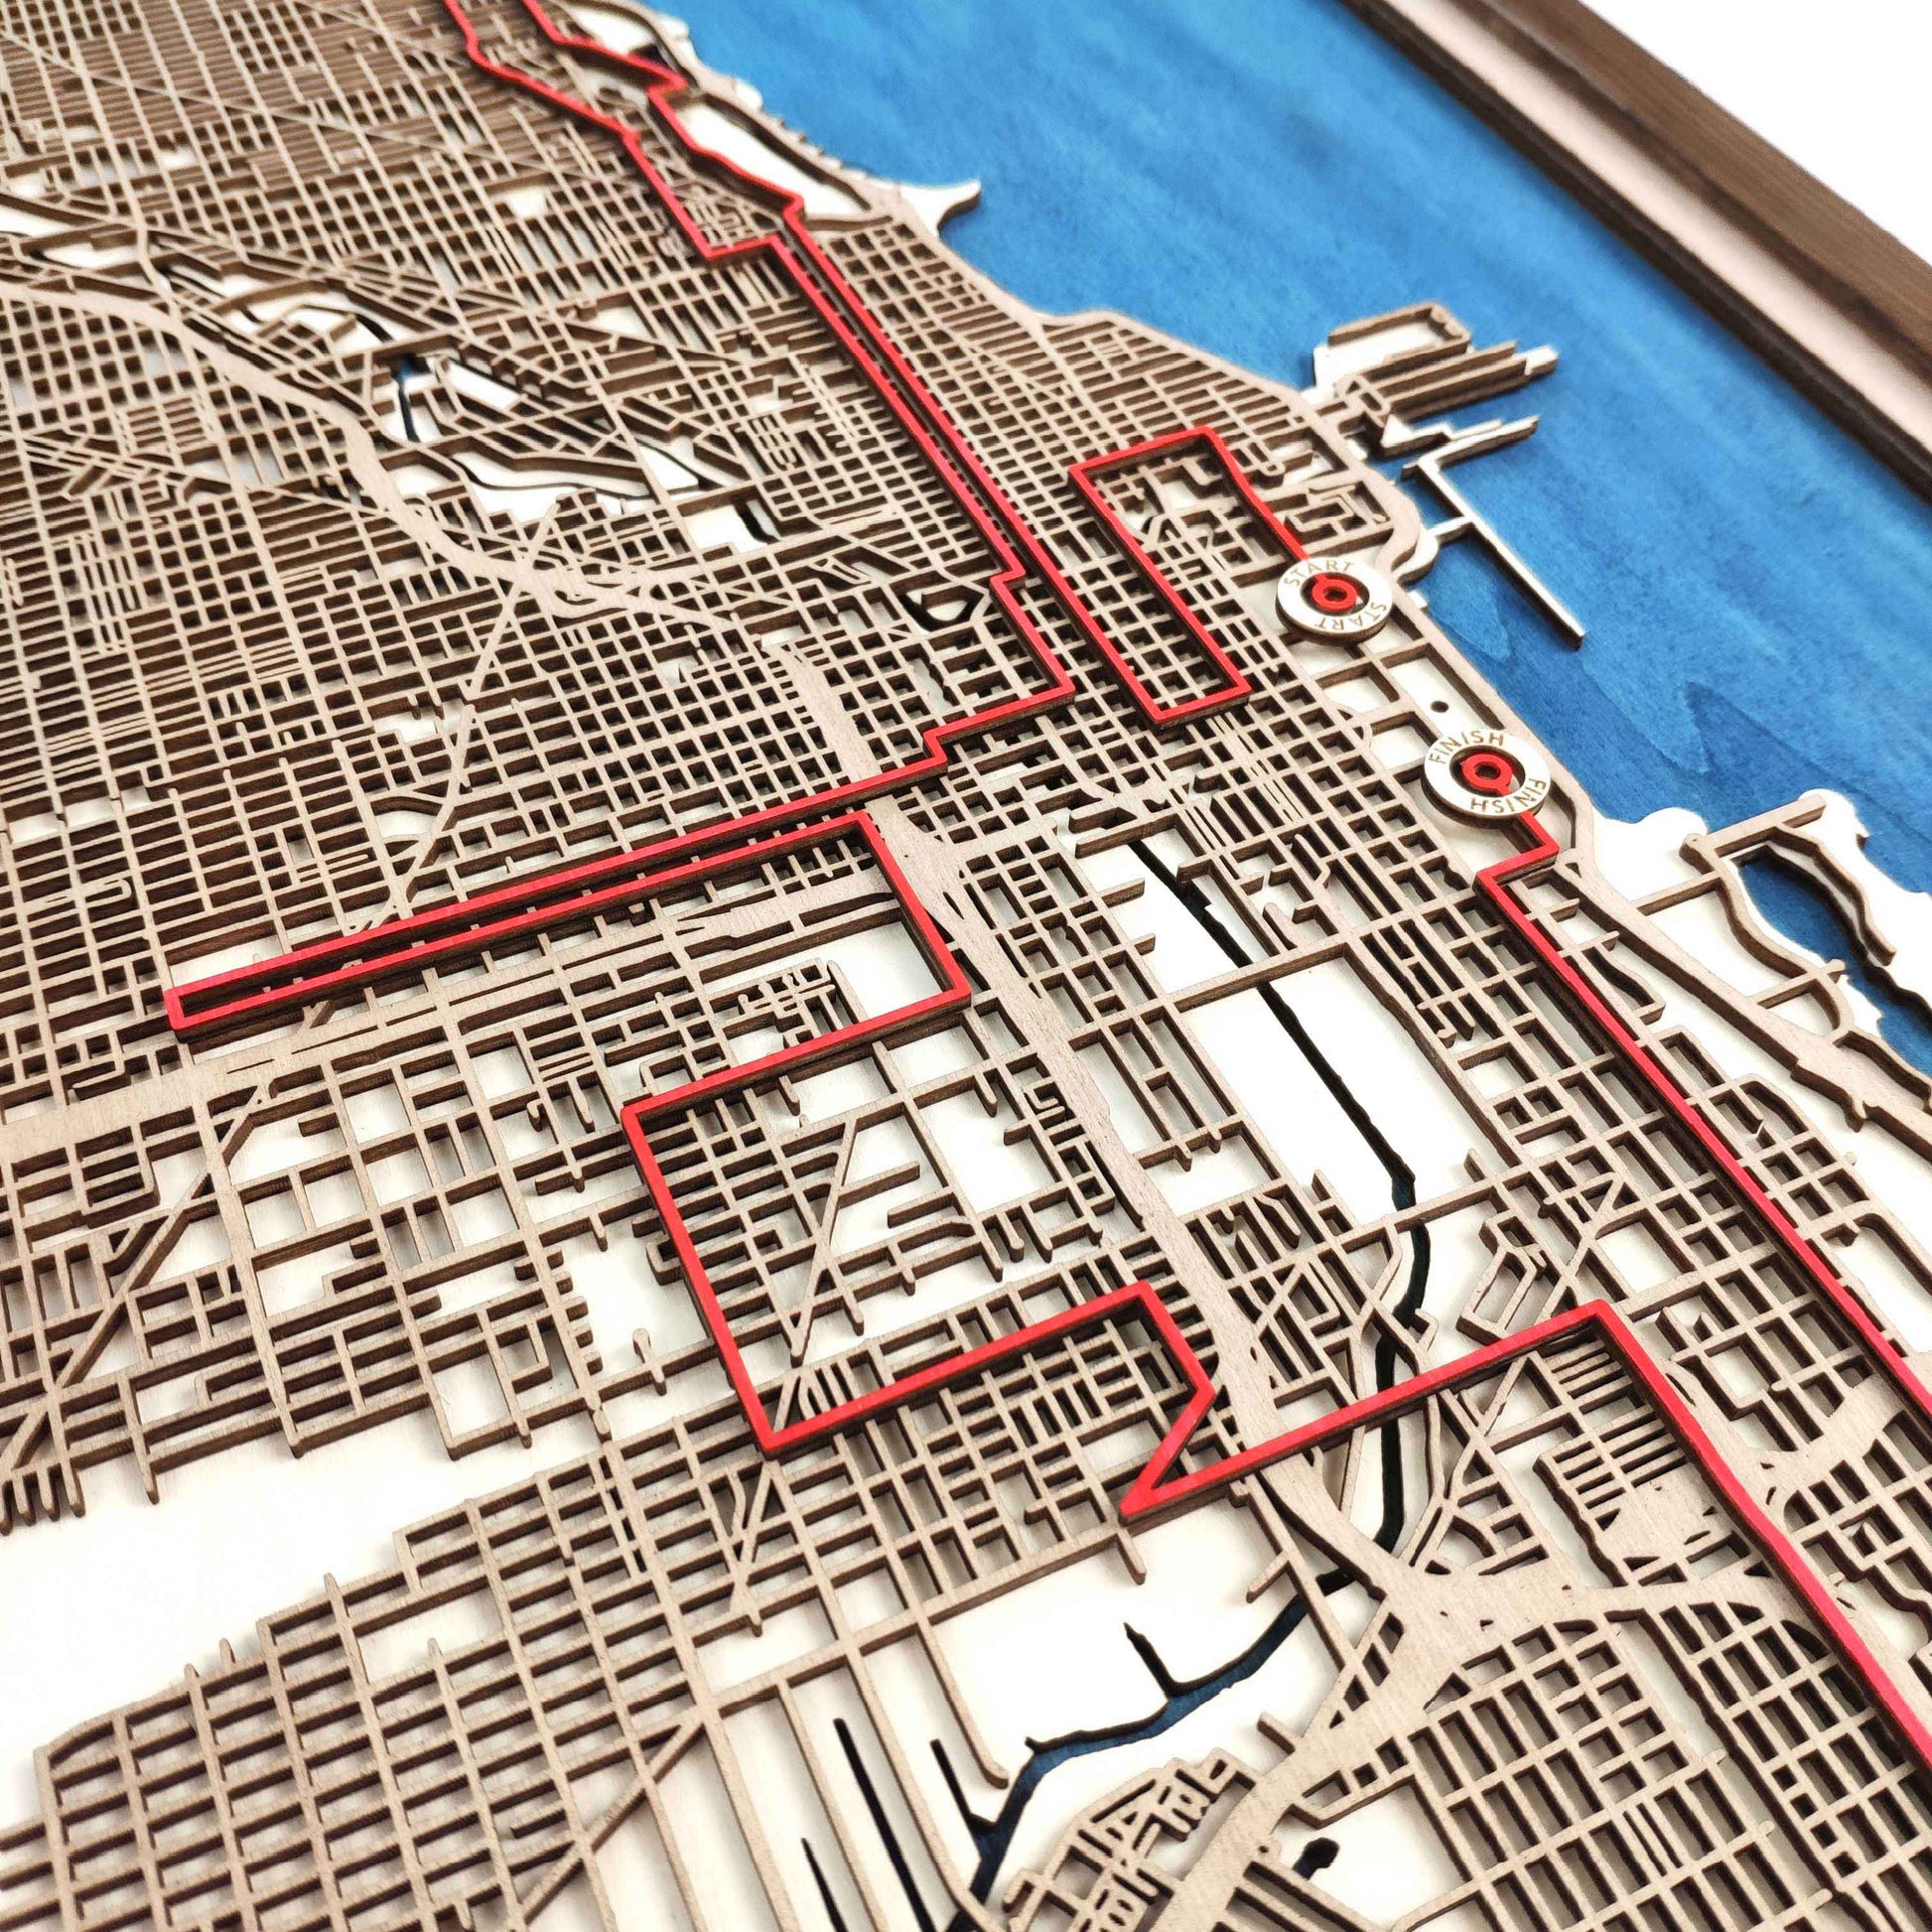 Chicago Marathon Commemorative Wooden Route Map – Collector's Item by CityWood - Custom Wood Map Art - Unique Laser Cut Engraved - Anniversary Gift